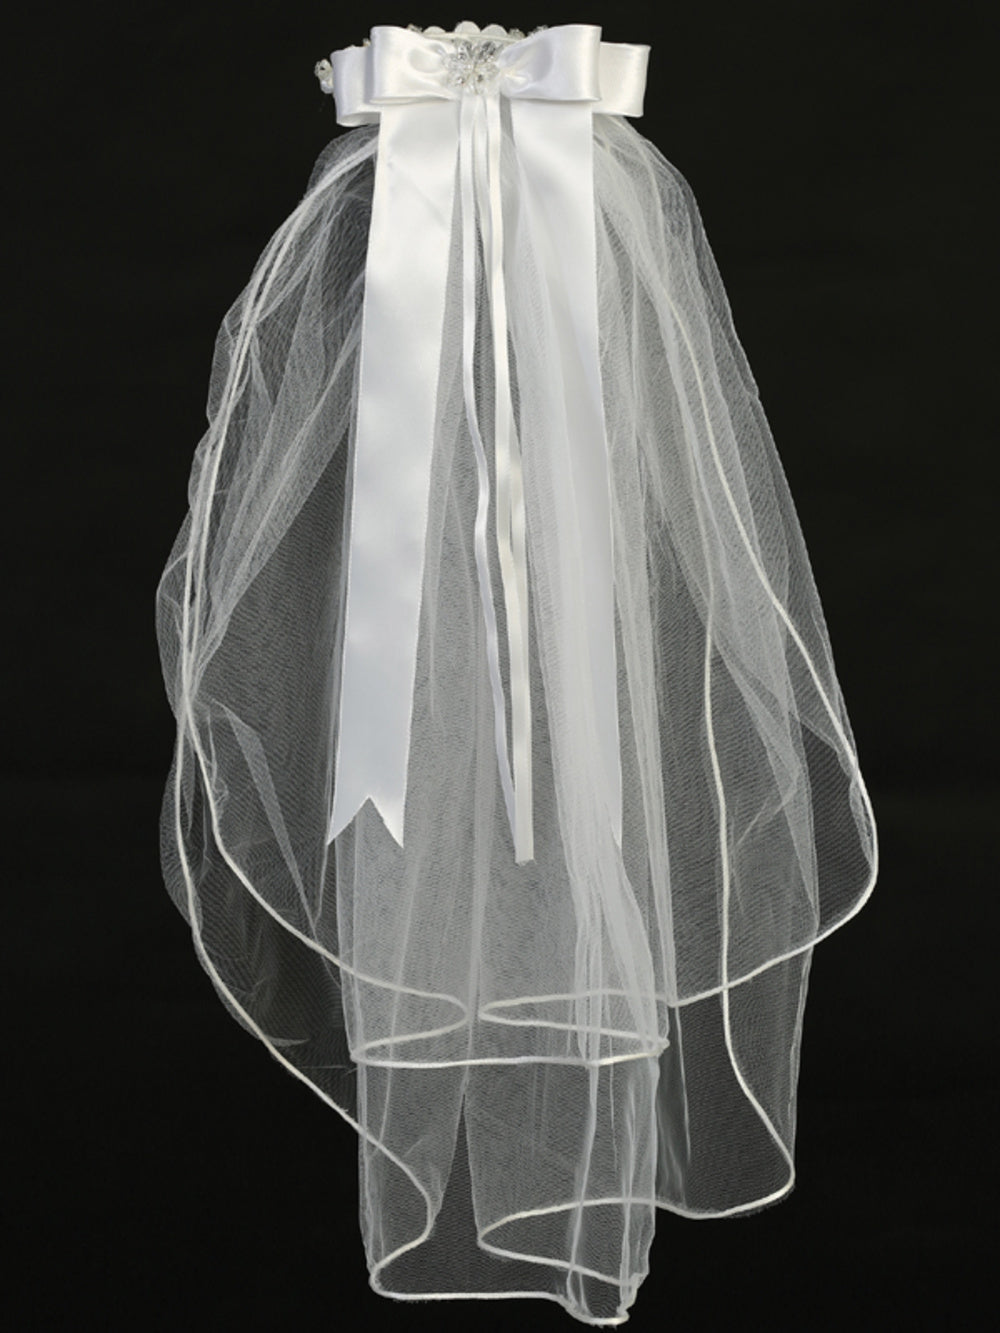 24" Communion Veil with Pearl Crown